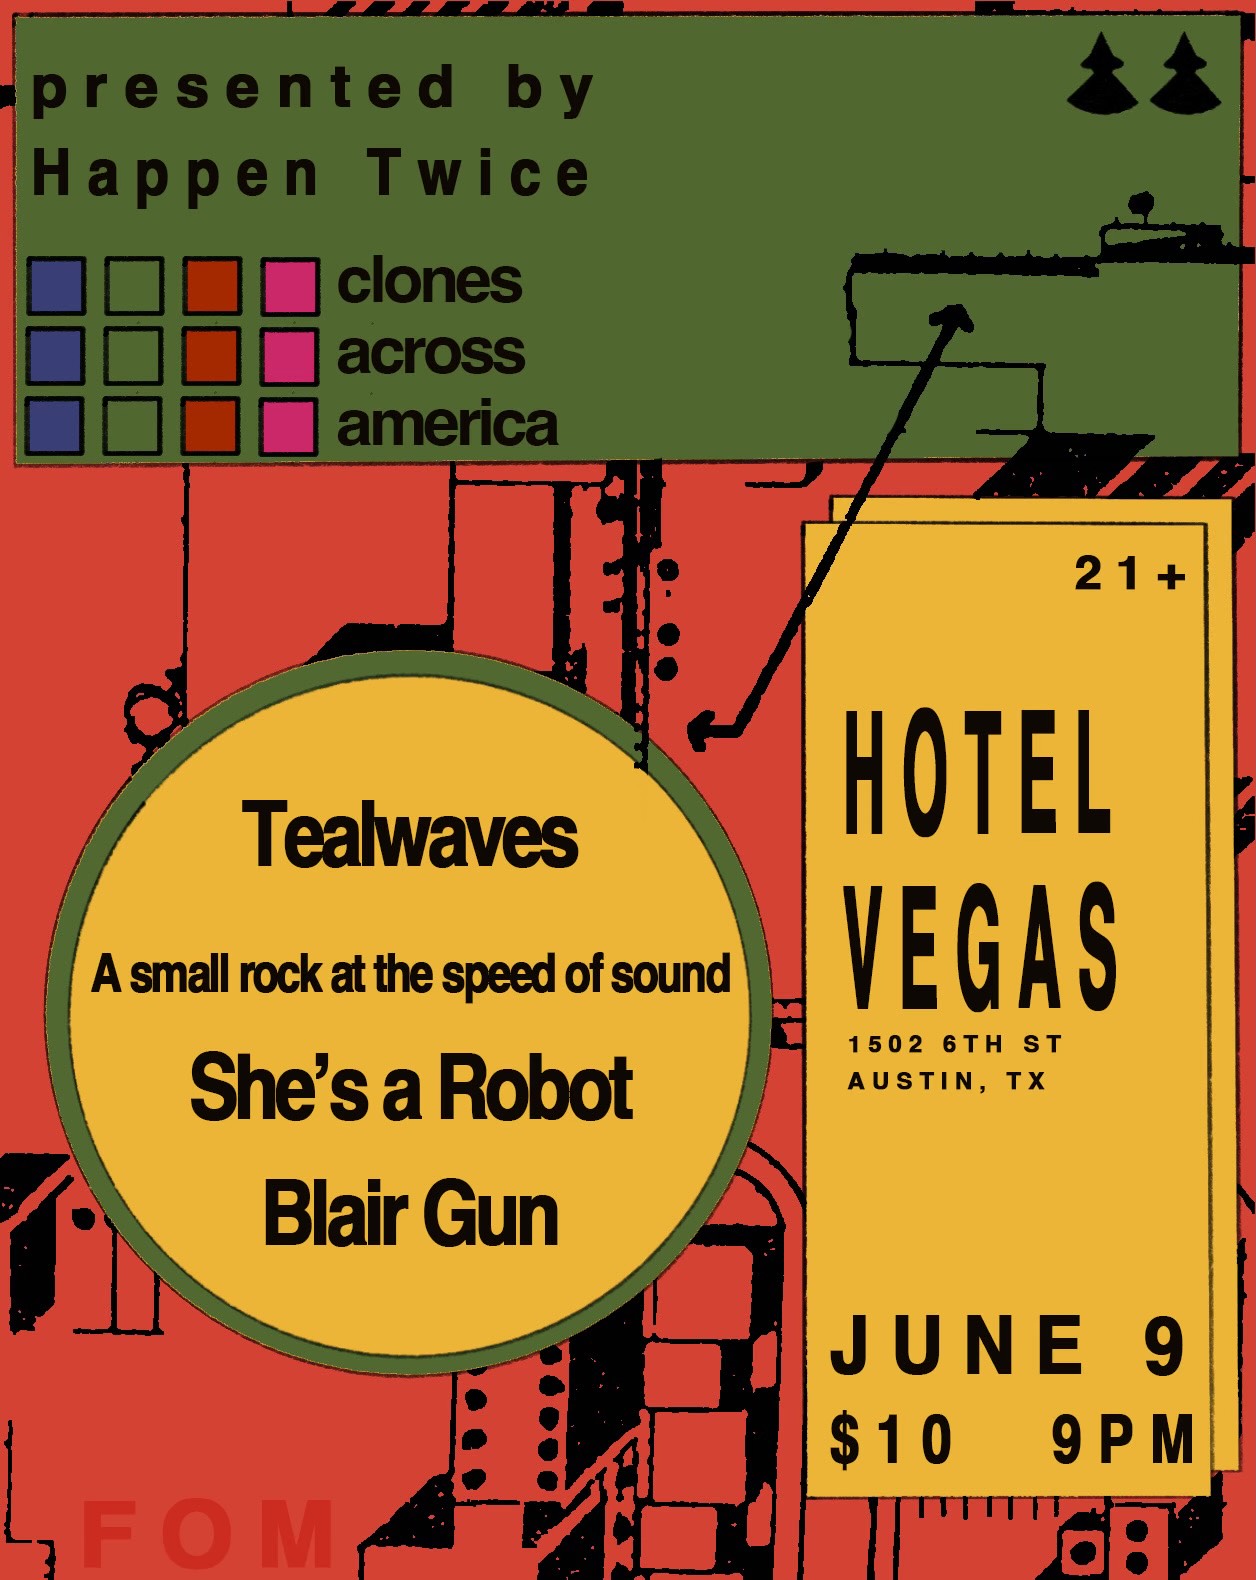 Happen Twice Presents: Tealwaves, Blair Gun, She's a Robot, A Small Rock at the Speed of Sound